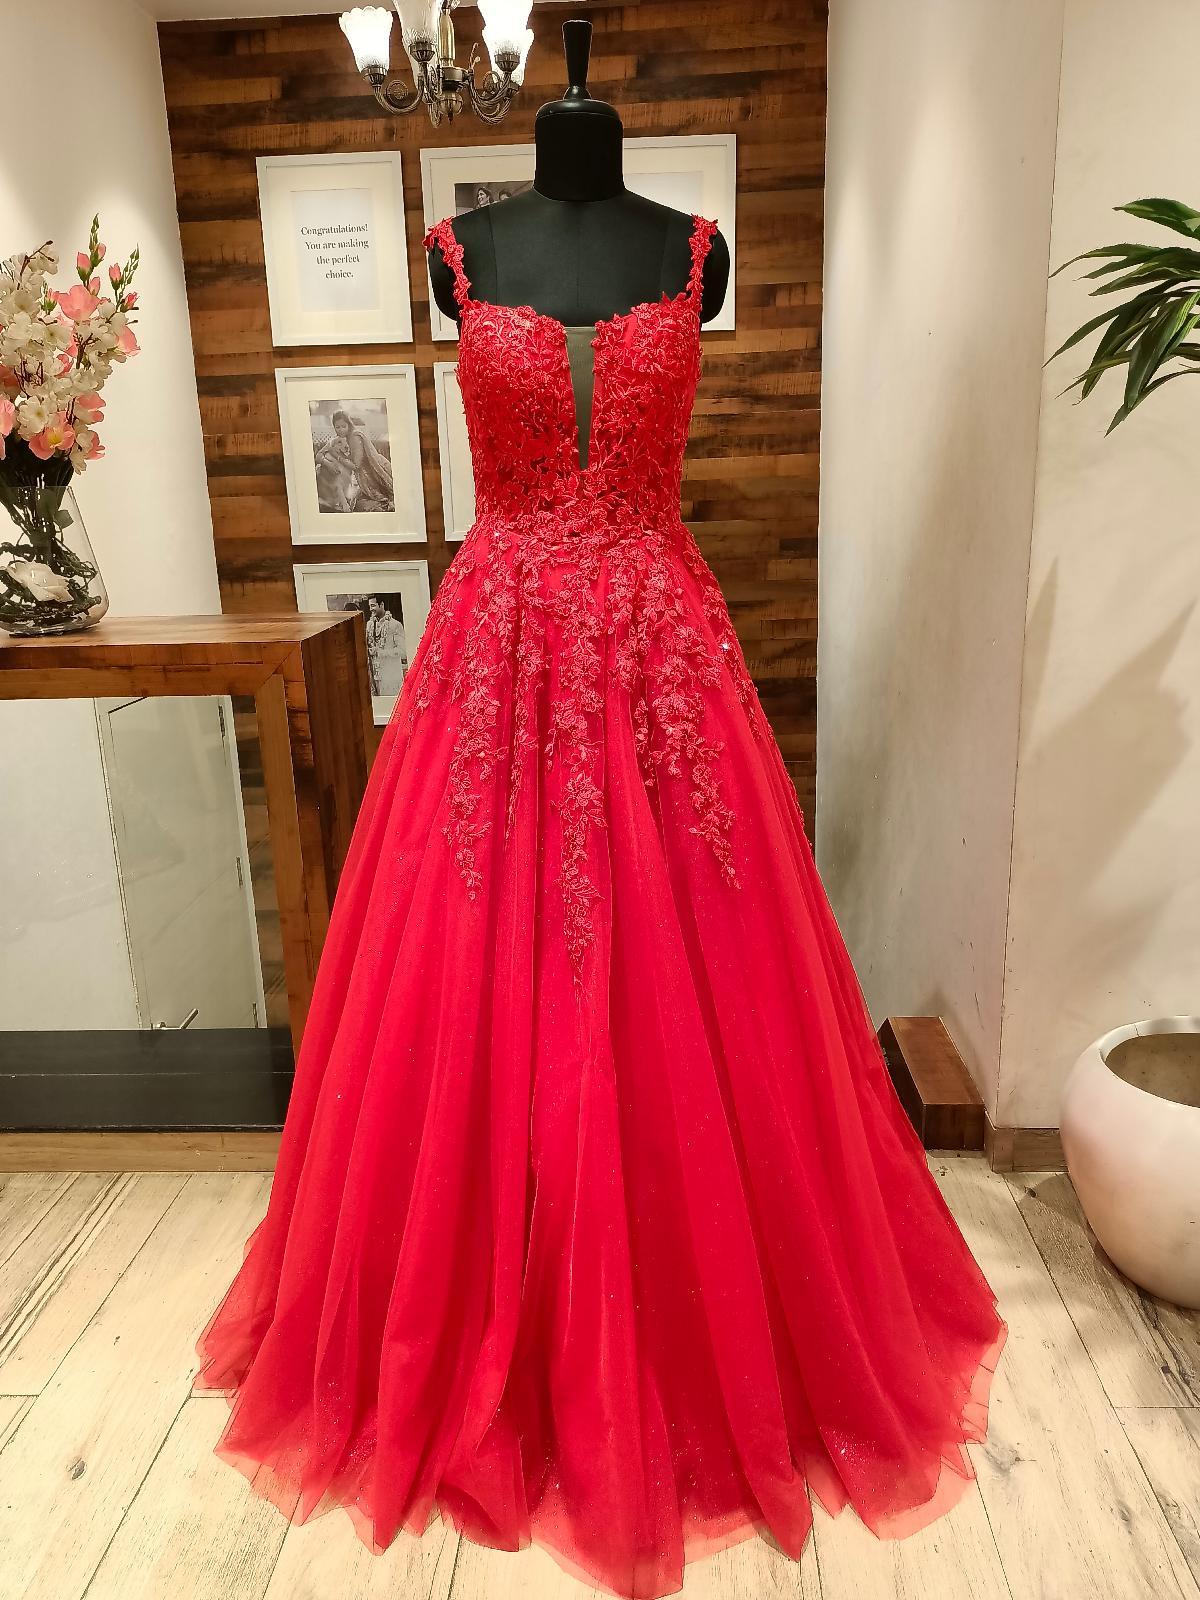 Update more than 209 princess gown for women